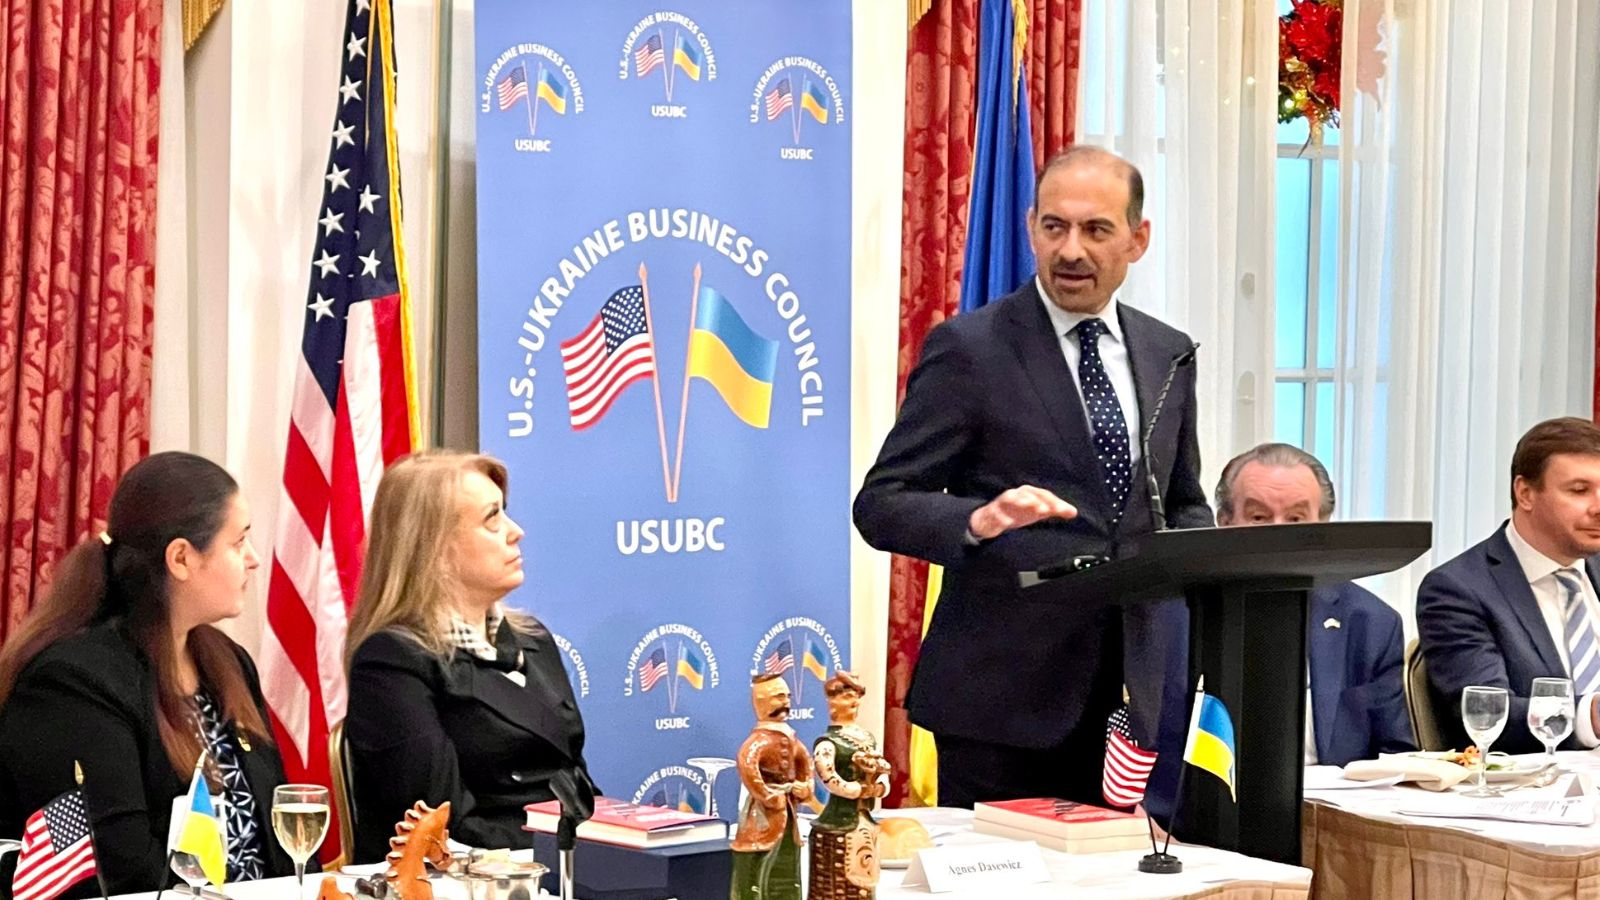 Special Representative for Commercial and Business Affairs Dilawar Syed speaks at the U.S-Ukraine Business Council in Washington, D.C. in December 2022.